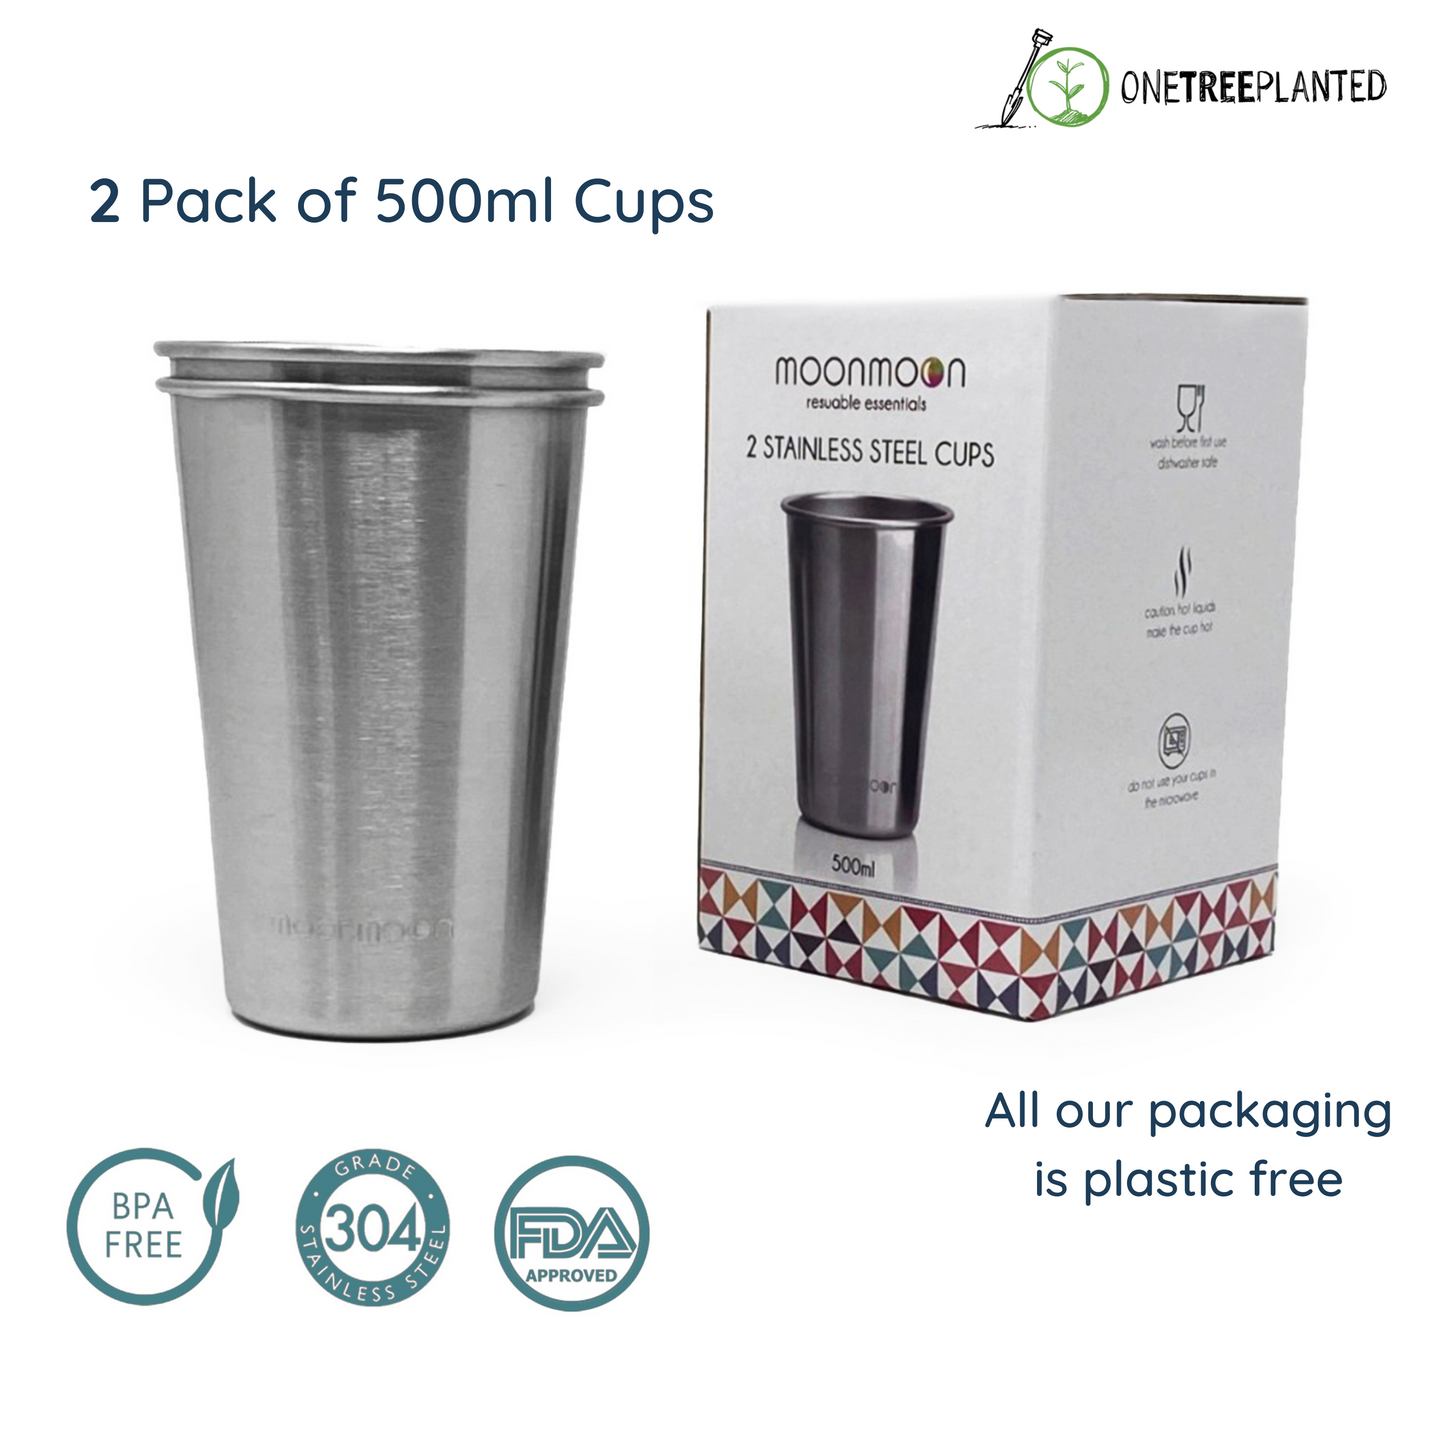 2 pack stainless steel cups pint size single walled reusable cups for water squash milk beer stainless steel cups for sale stainless steel cups for kids stainless steel cups wholesale stainless steel cups near me stainless steel cups supplier UK